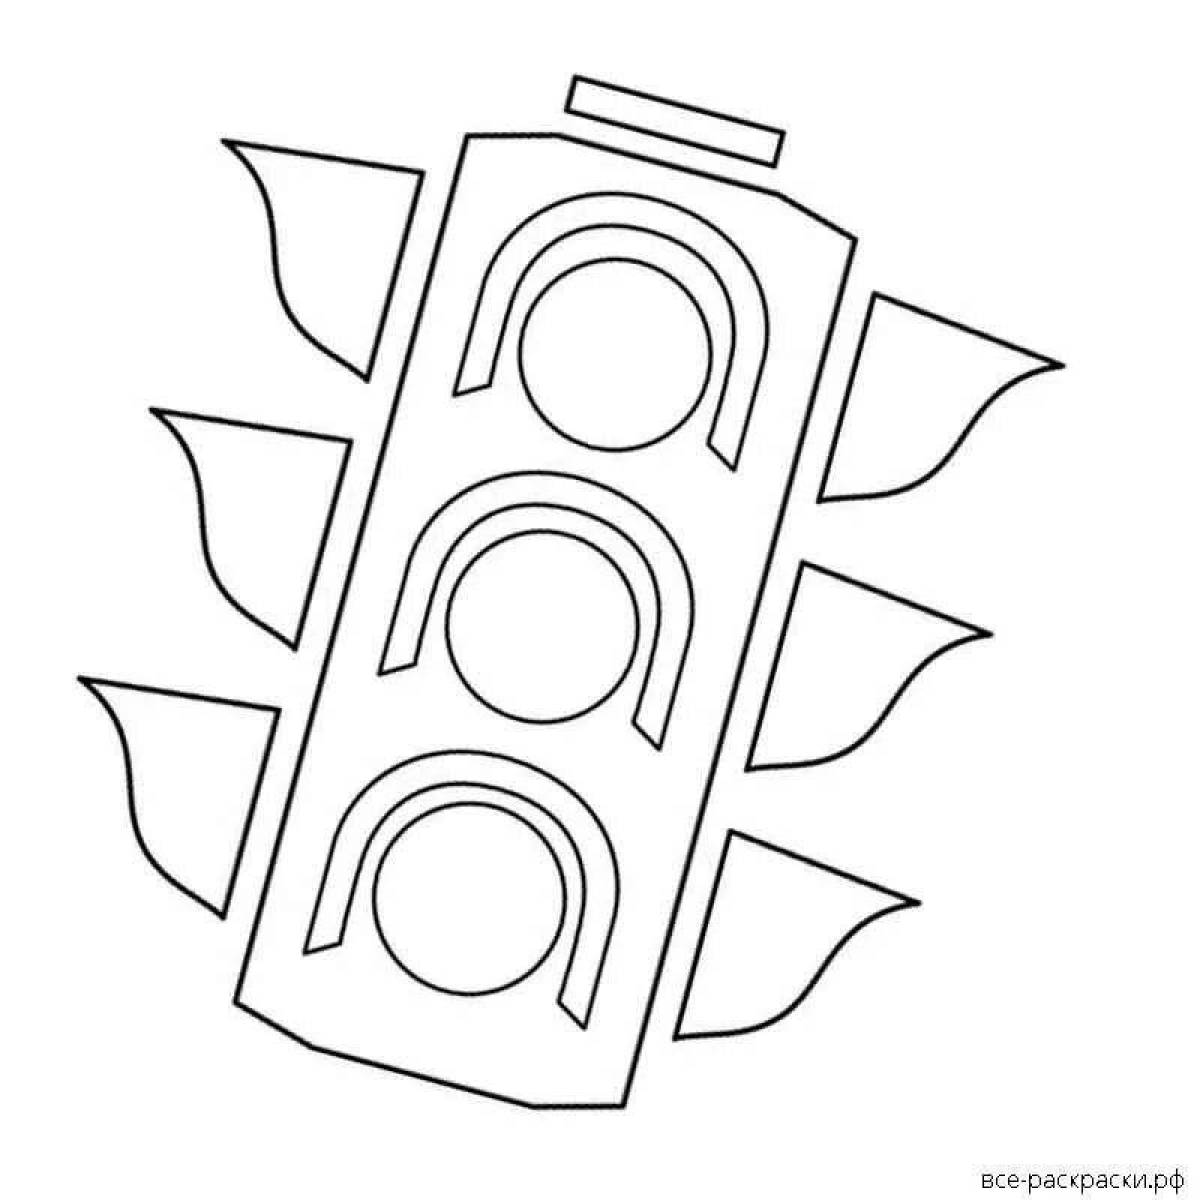 Inviting traffic light coloring page for preschoolers 2-3 years old